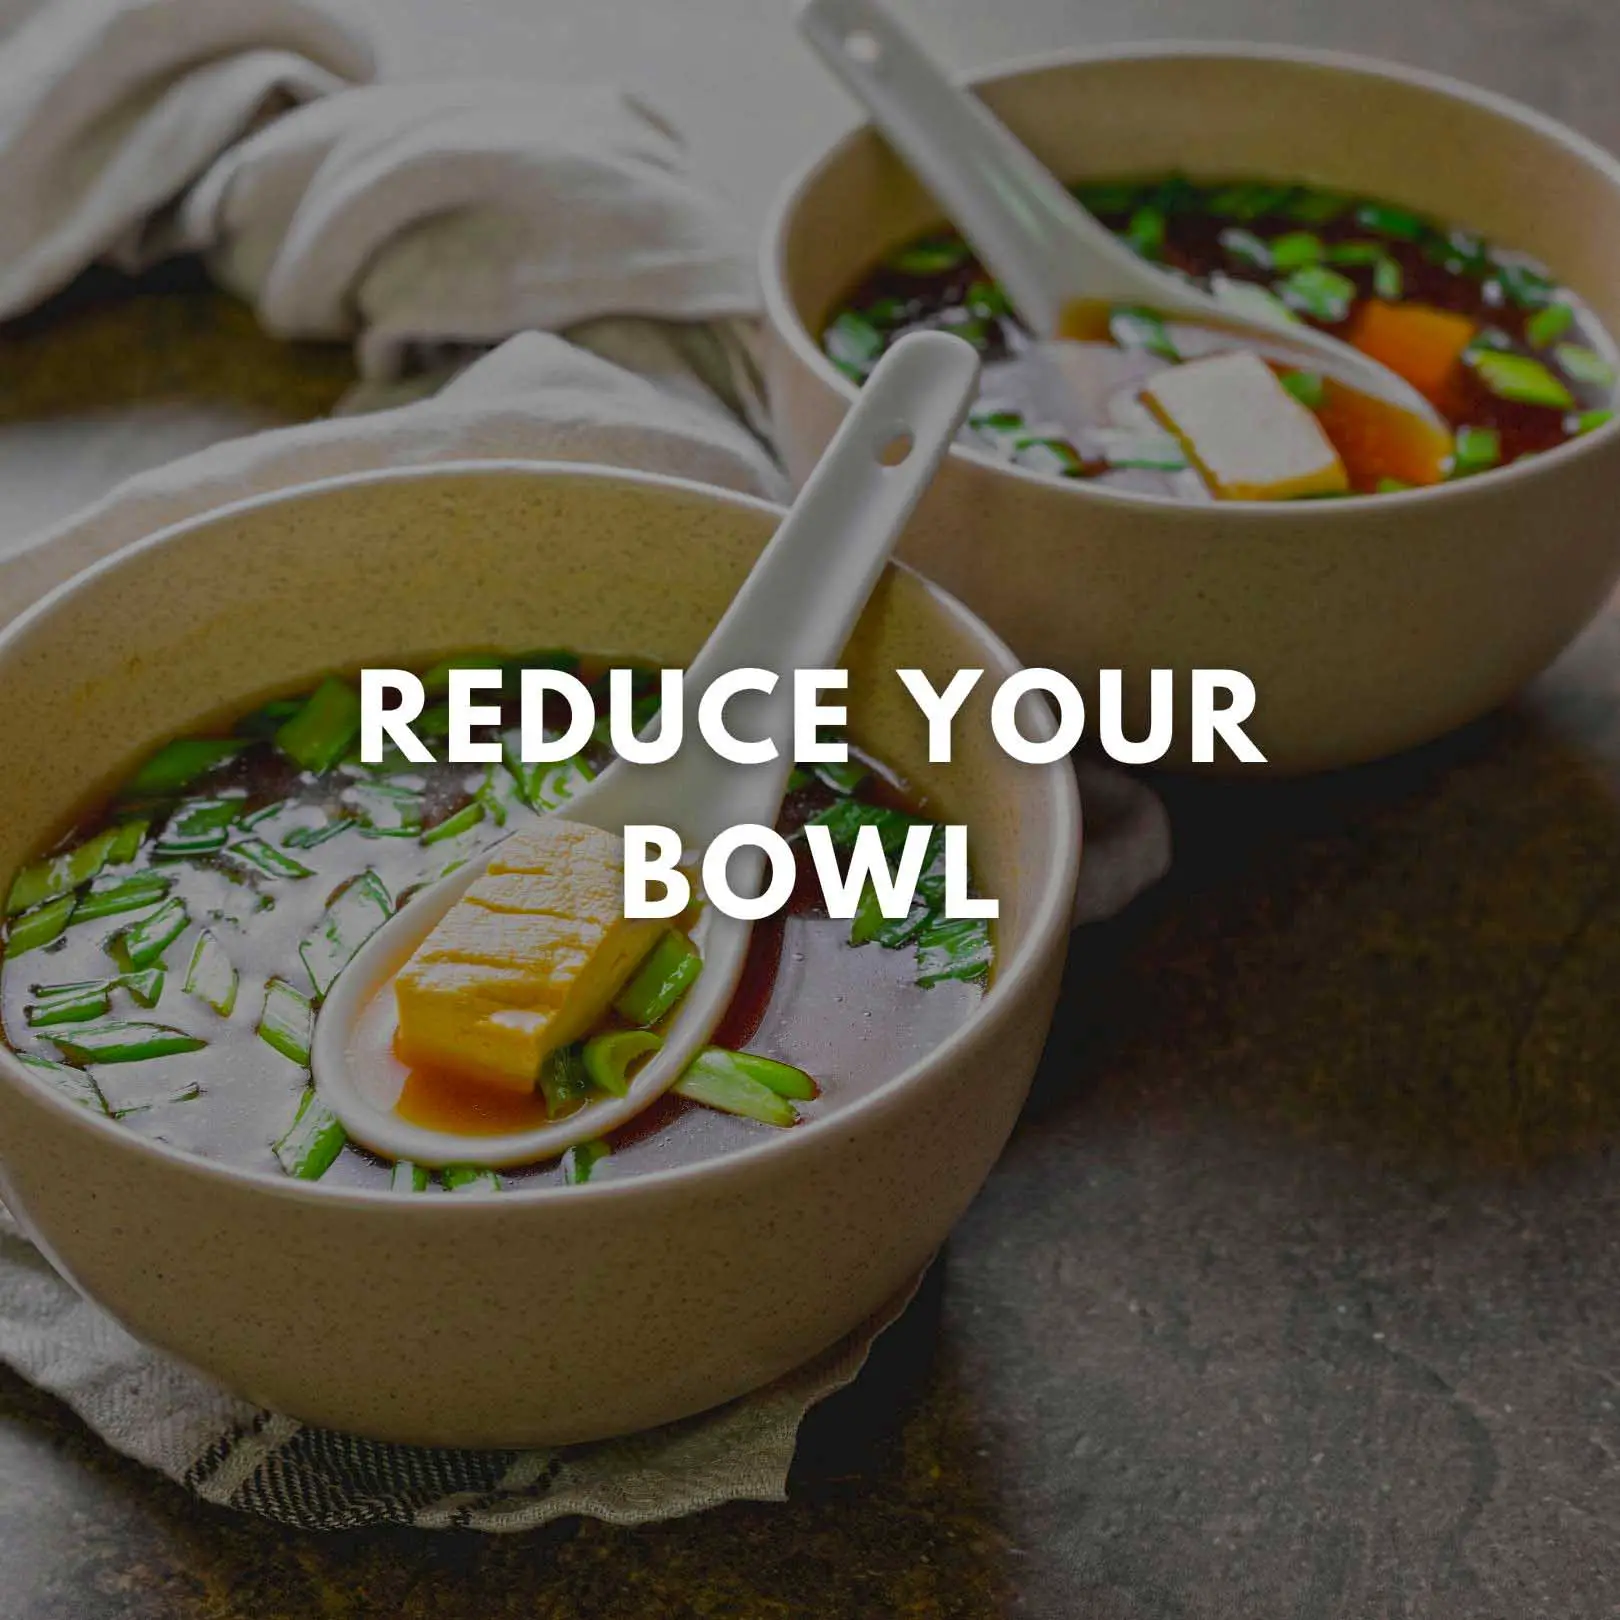 Reduce your bowl